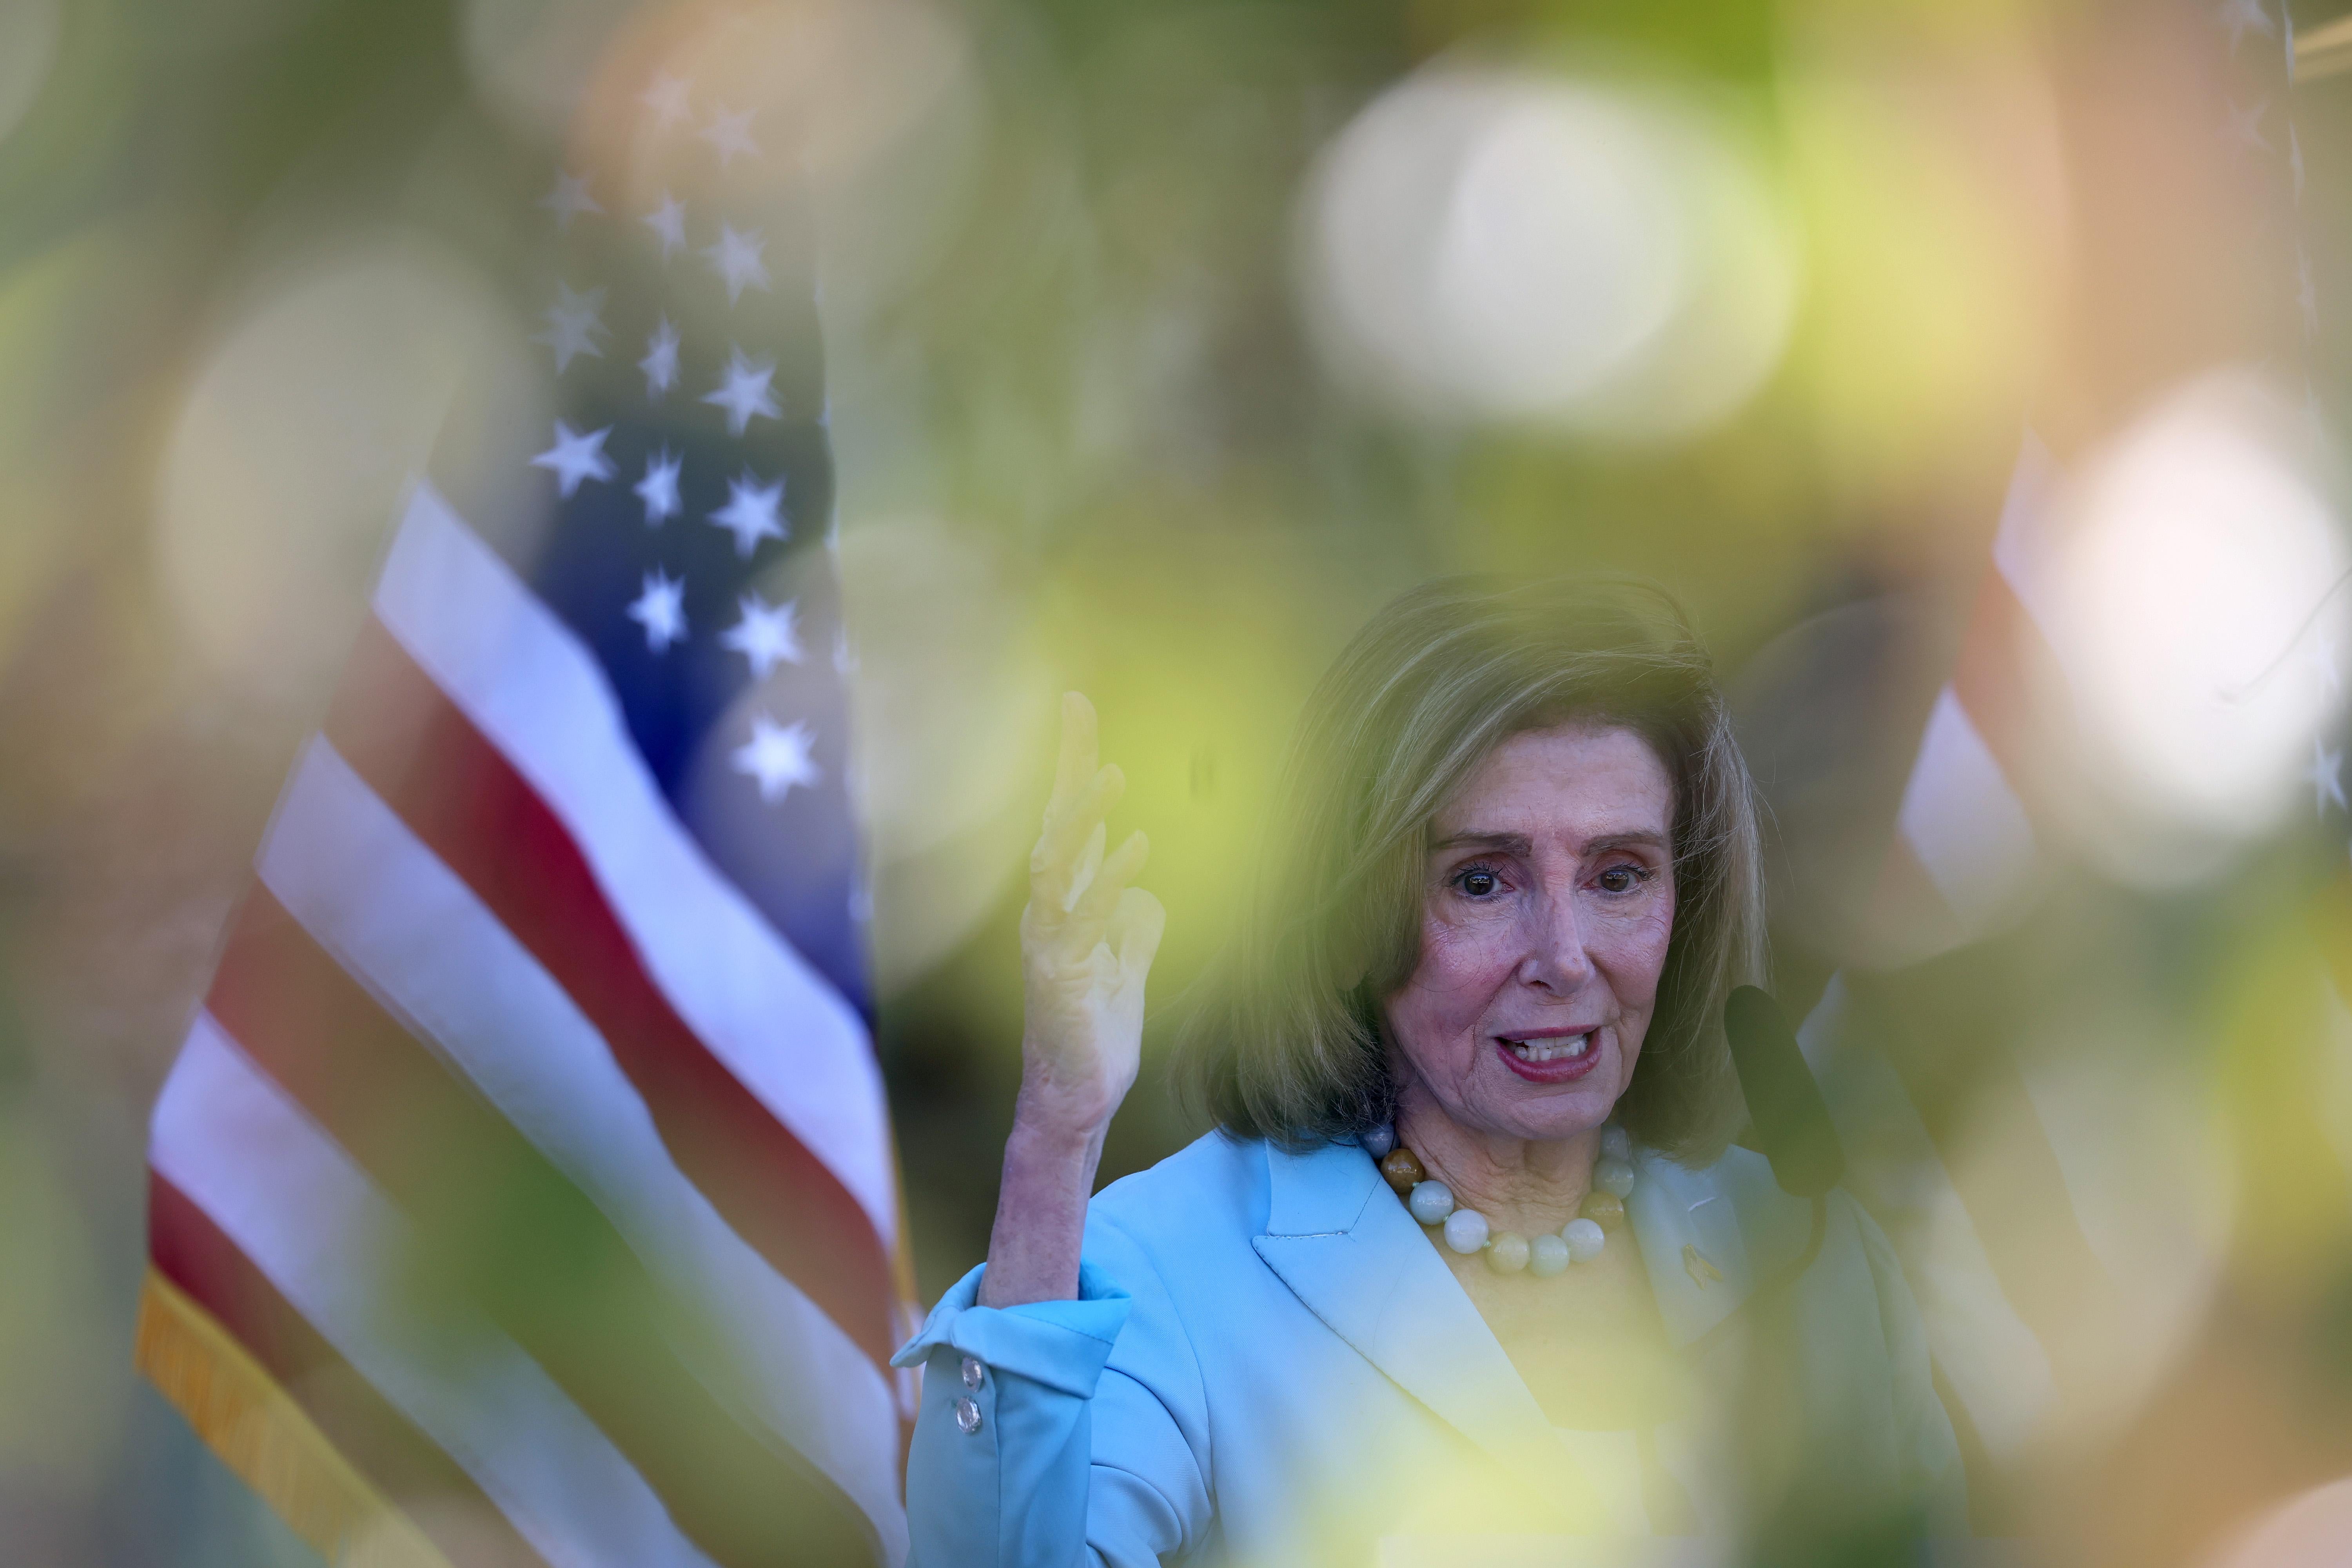 Nancy Pelosi waves in front of a flag, as seen through out-of-focus leafs.